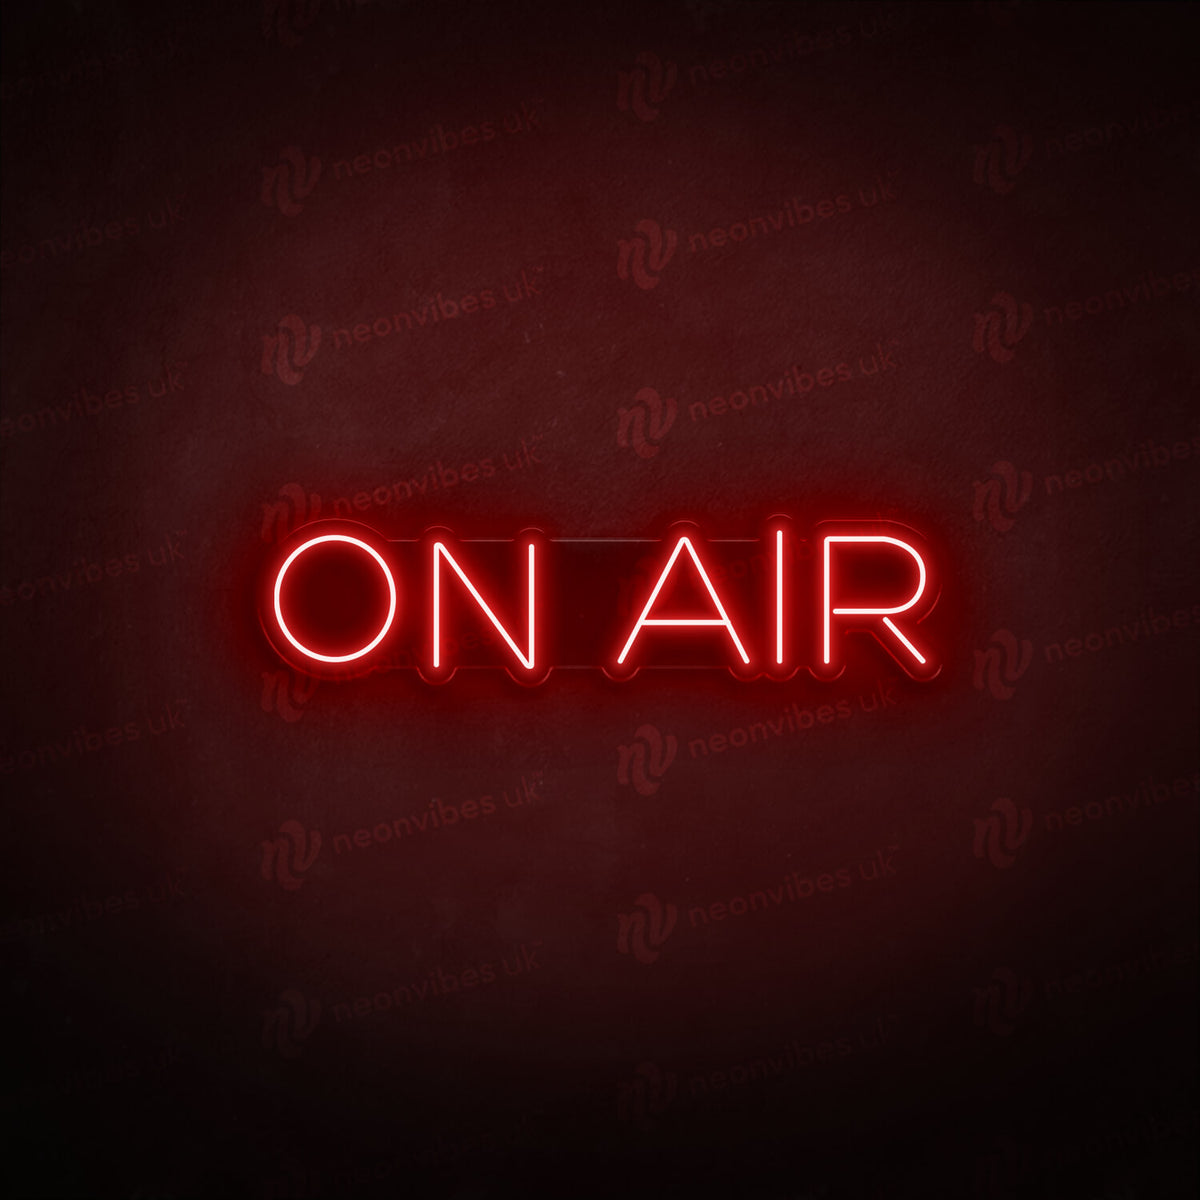 On Air neon sign